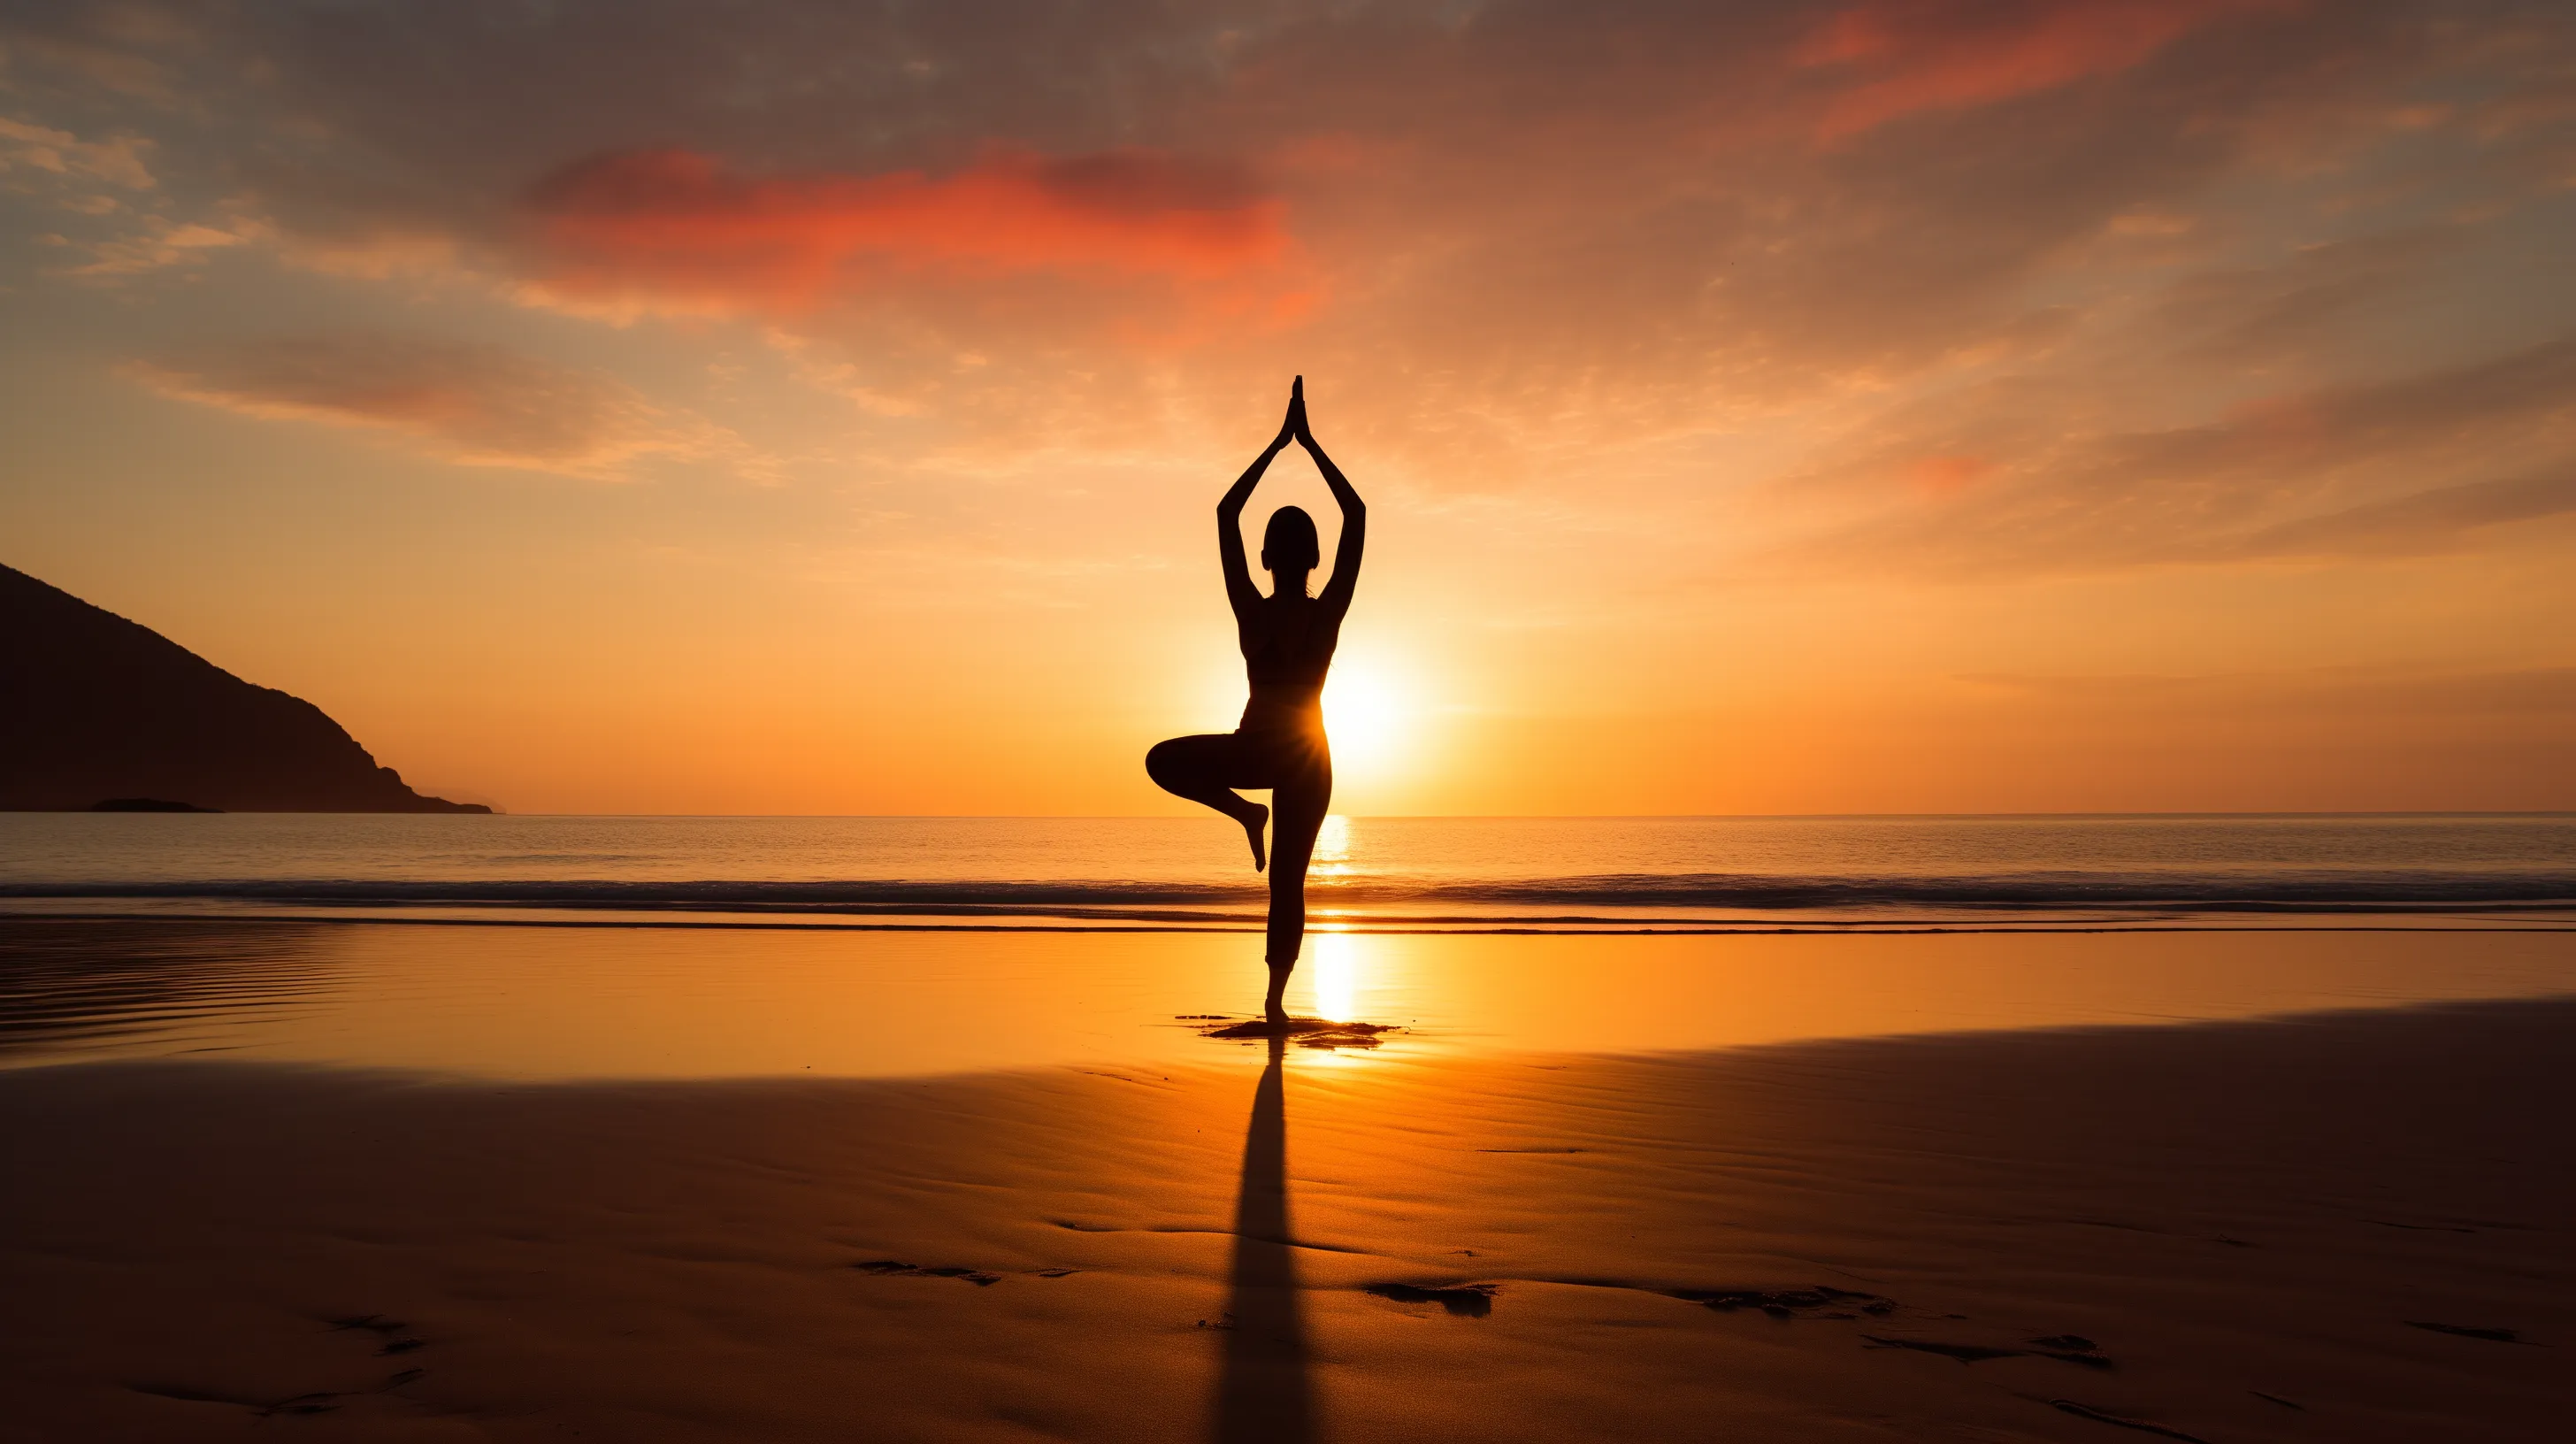 sunrise over tranquil beach, with solo silhouette in distance performing graceful yoga pose